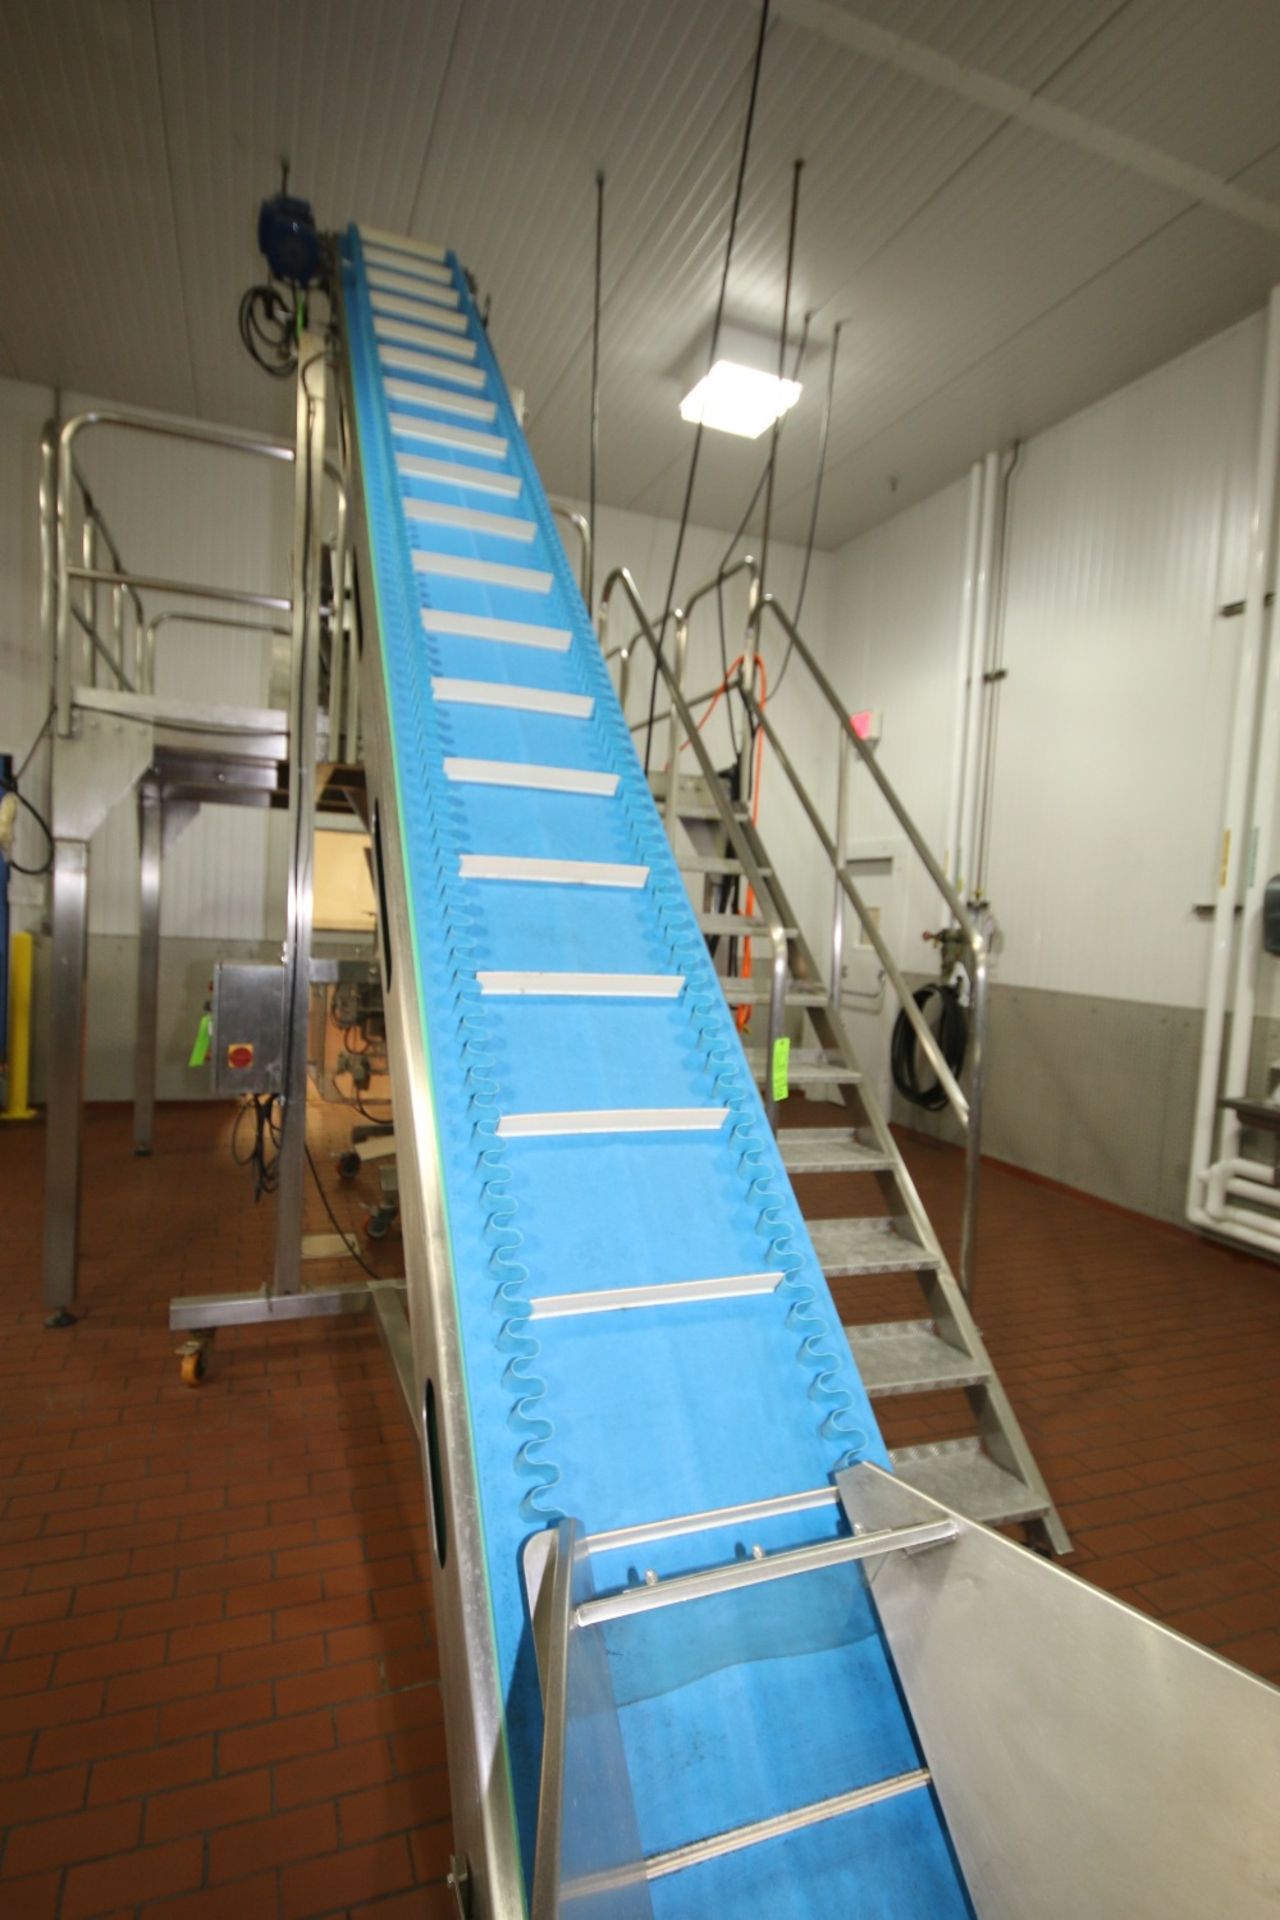 2010 Weighpack 168" H S/S Inclined Conveyor with 16" W Belt with Flights, Arpin Feed and IG5 VFD - Image 3 of 4